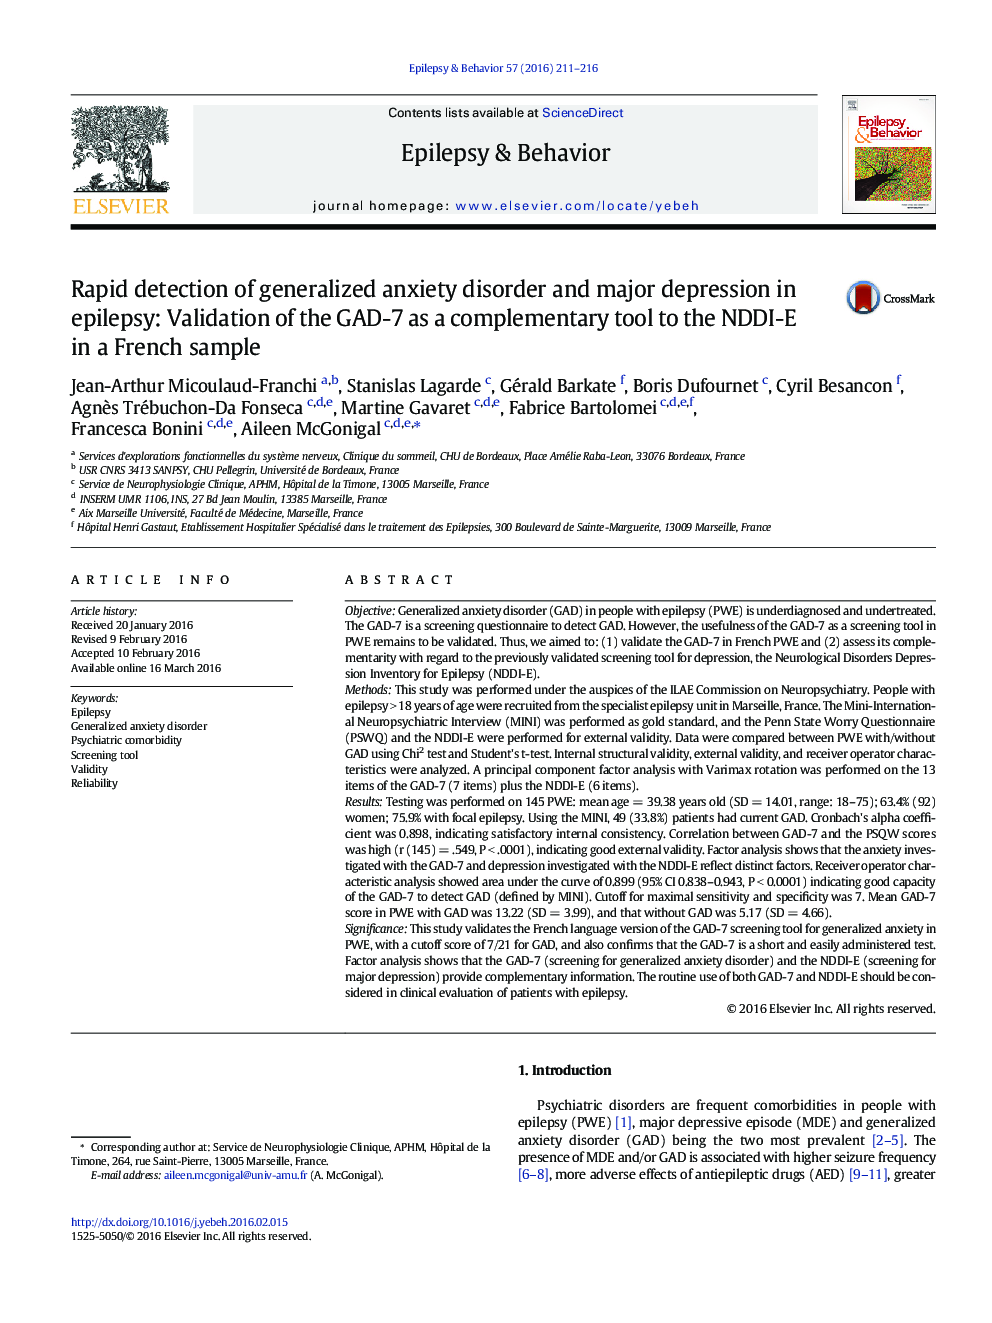 Rapid detection of generalized anxiety disorder and major depression in epilepsy: Validation of the GAD-7 as a complementary tool to the NDDI-E in a French sample